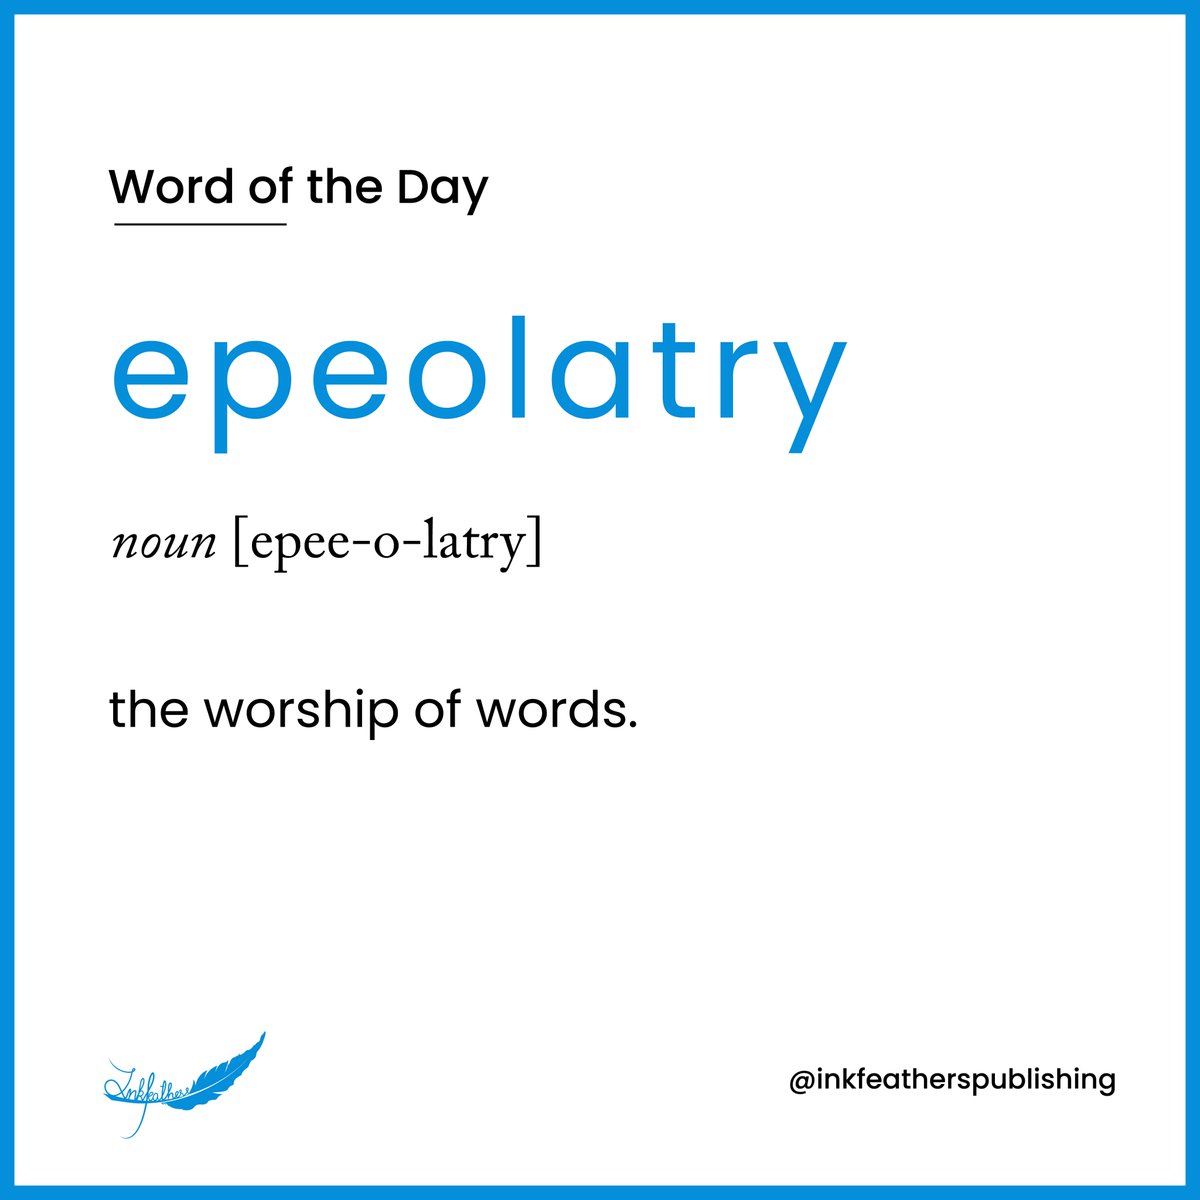 Are you someone who revels in the #magic of language? If so, then our #WordOfTheDay series is just for you🥳

Let us indulge in the beauty and #power of #language, and embrace the art of epeolatry together✨

#word #learn #inkfeathers #publishing #newword #wordoftheday